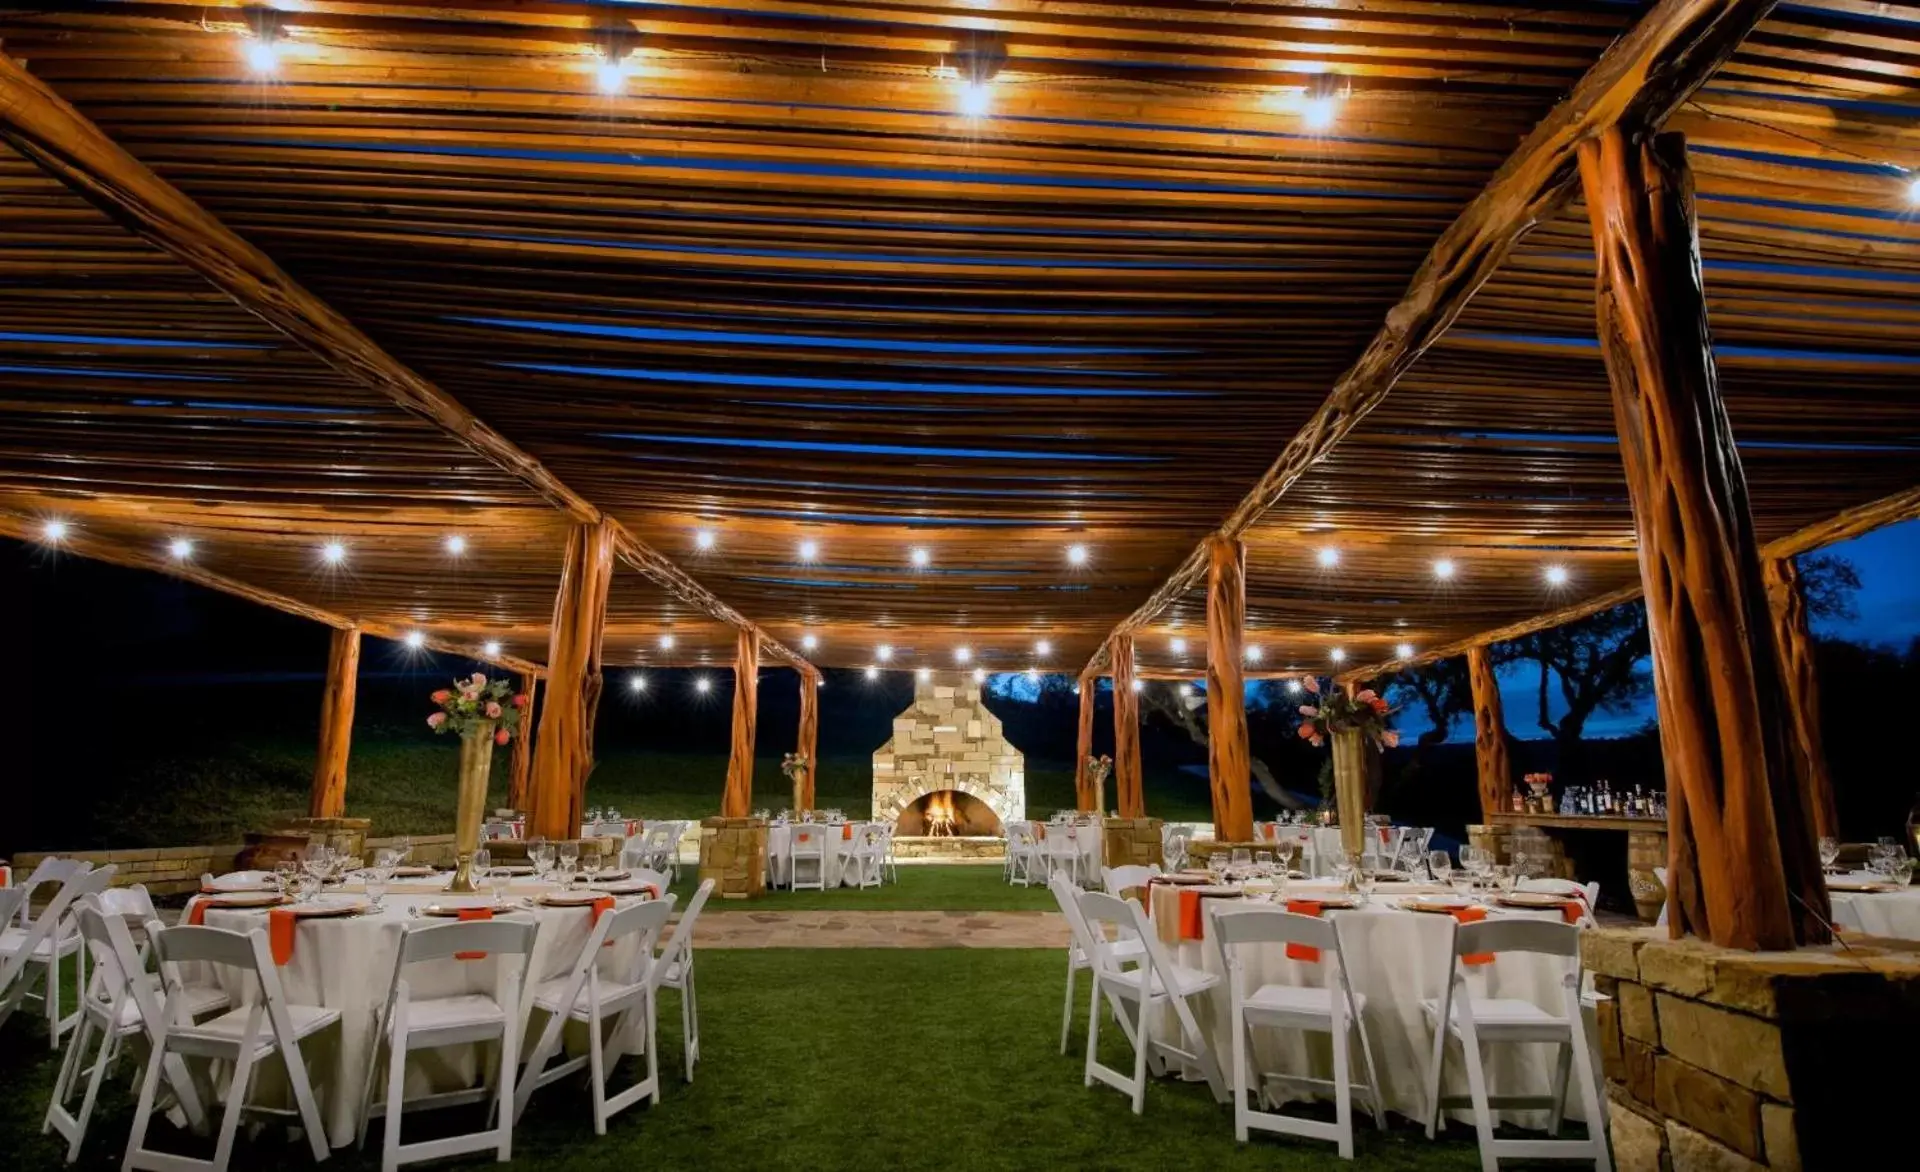 Banquet/Function facilities, Banquet Facilities in Tapatio Springs Hill Country Resort